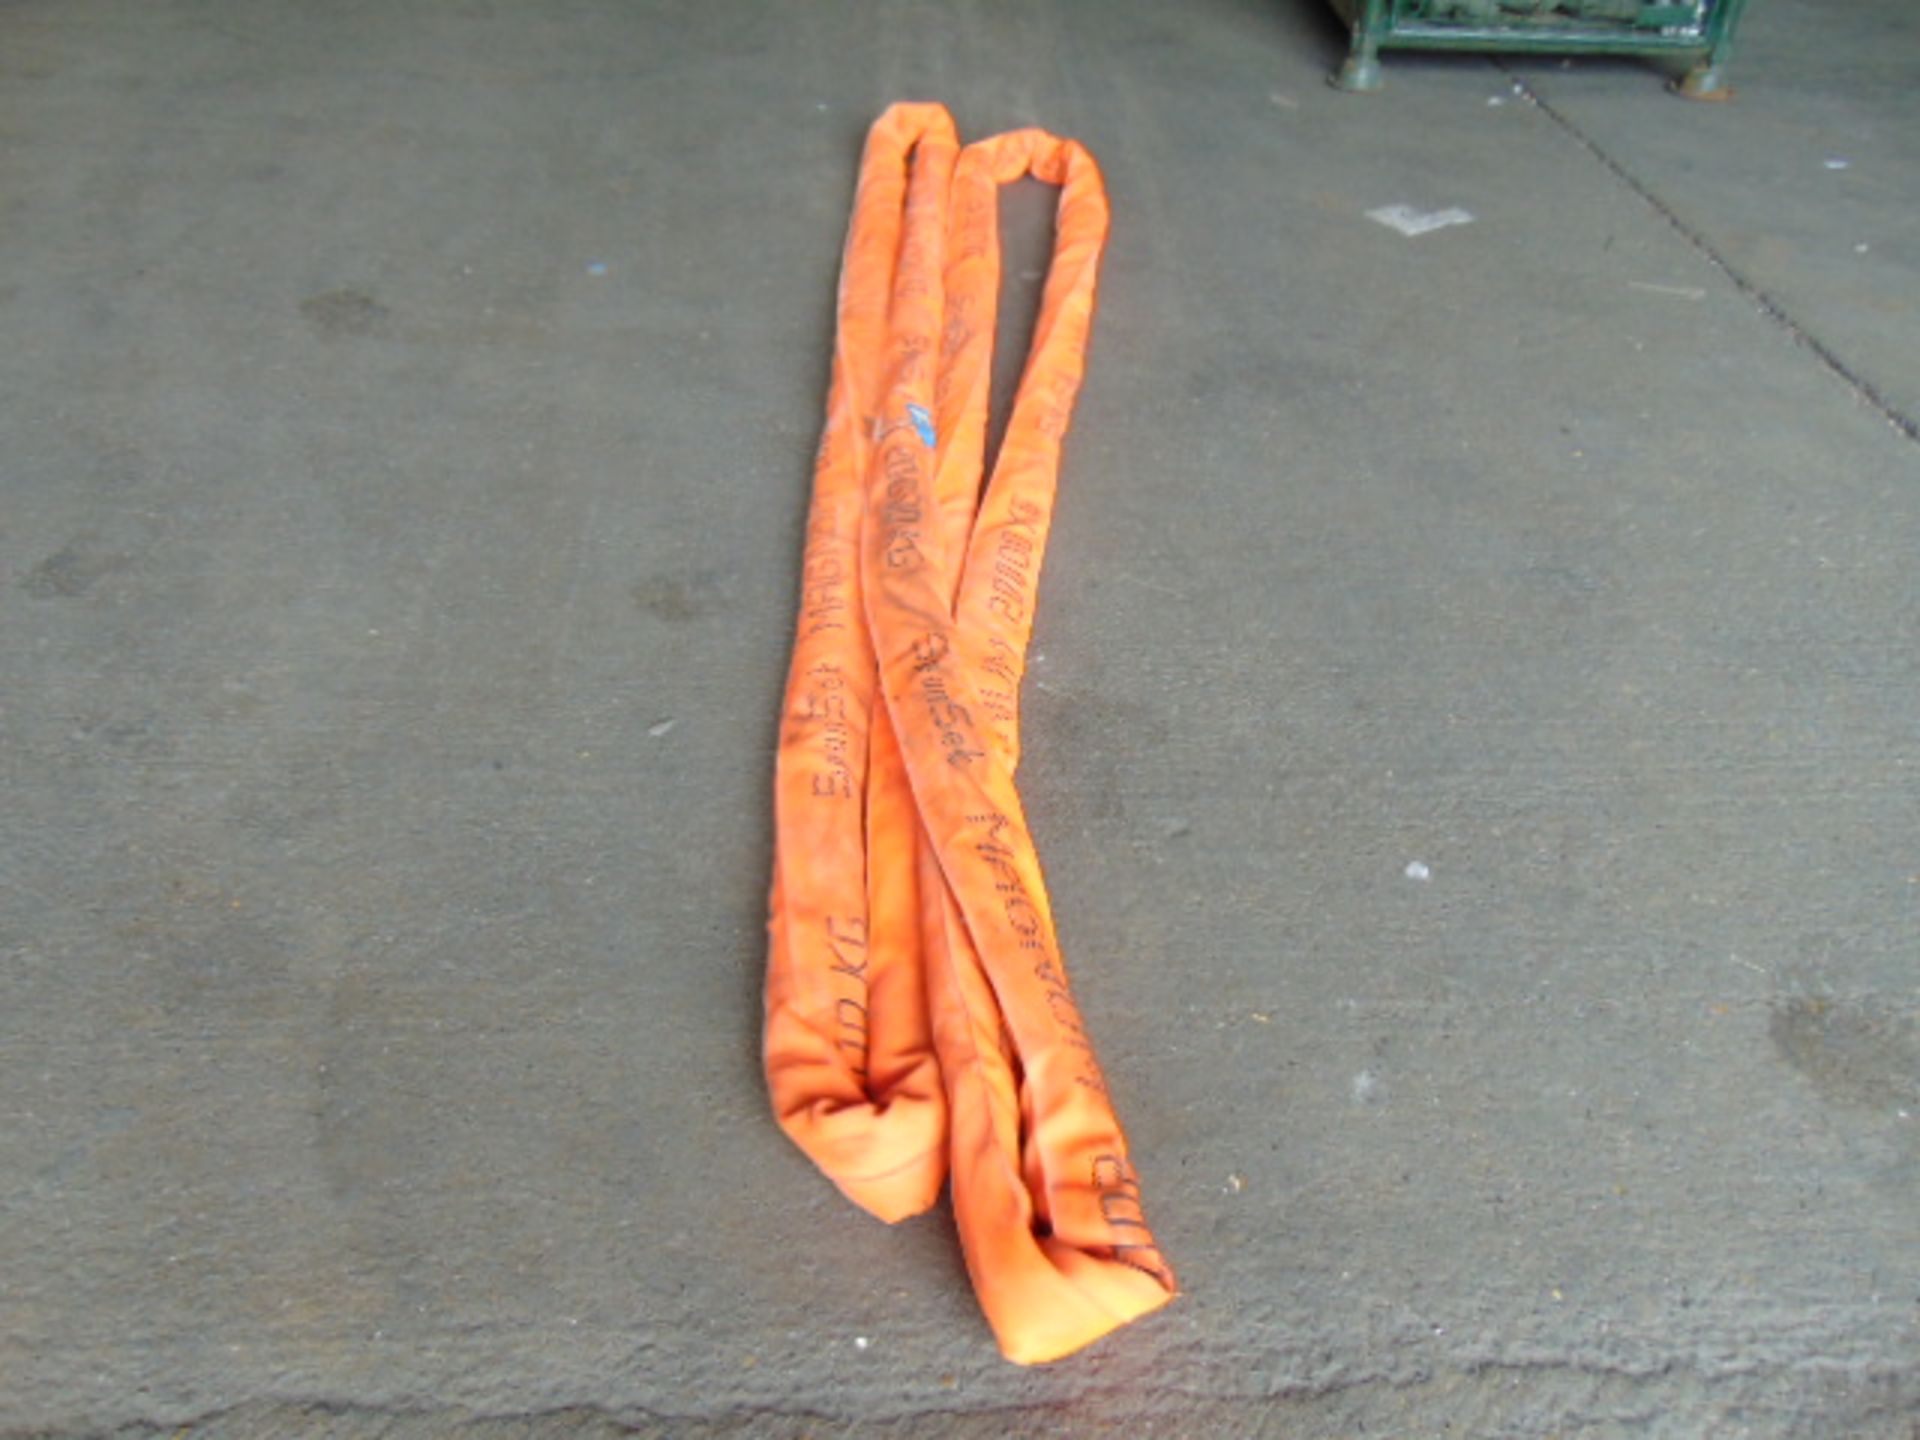 New Unused SpanSet Magnum 20,000kg Lifting/Recovery Strop from MOD - Image 3 of 5